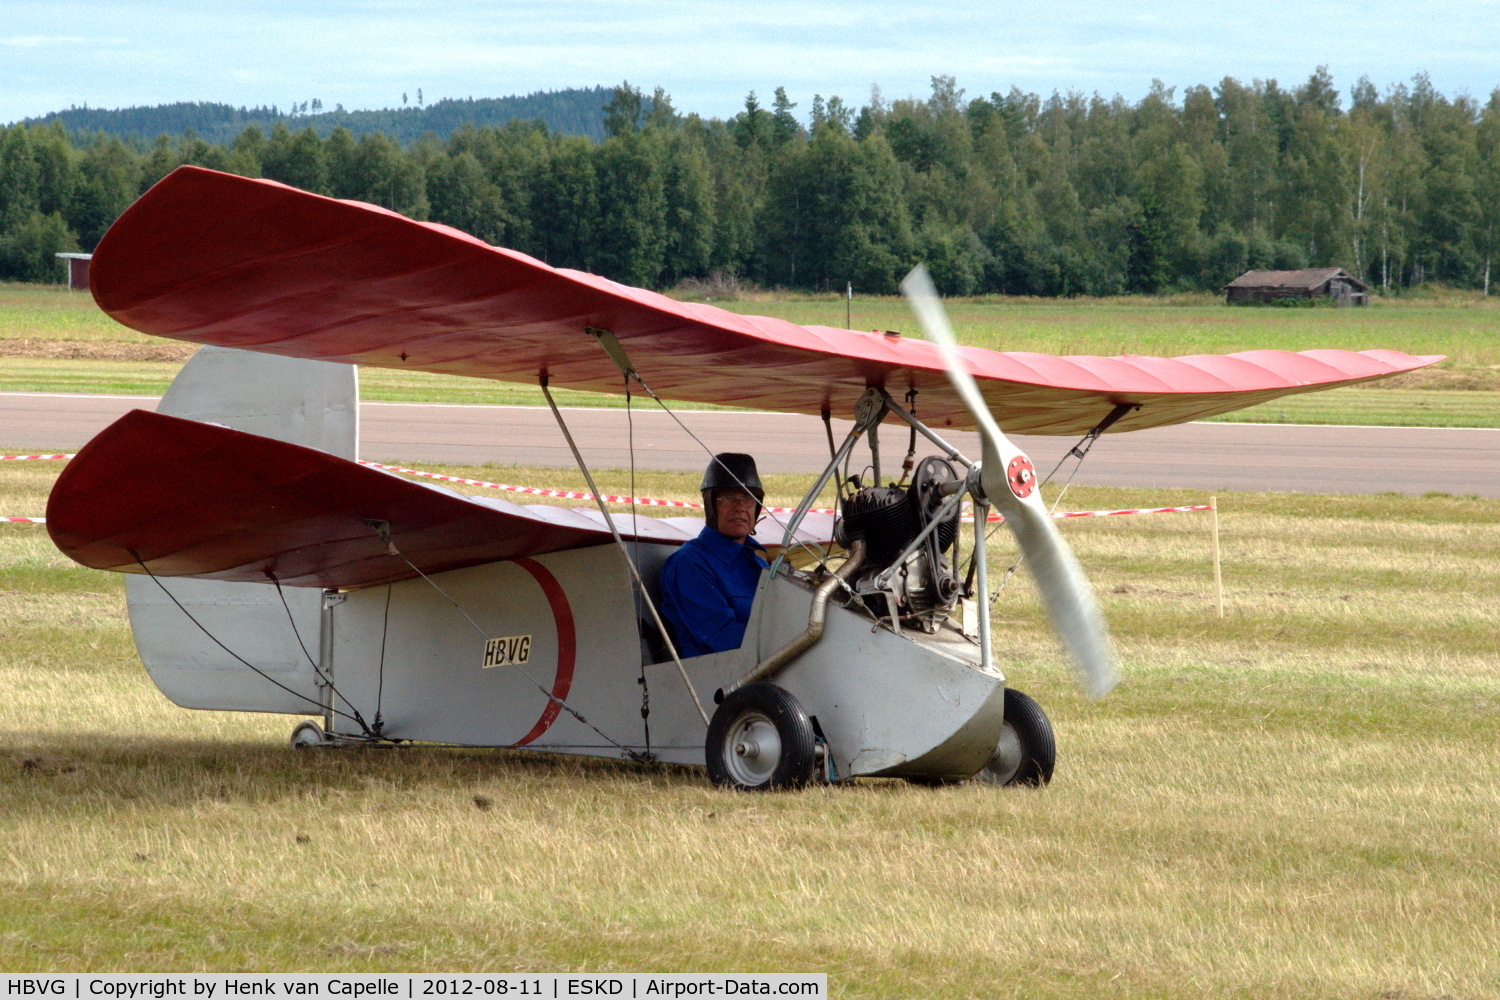 HBVG, Mignet HM.14 Pou-du-Ciel C/N Not found HBVG, A restored taxyable but not airworthy Mignet is being taxied by its owner, Kjell Dalsheim, at Dala-Järna airfield, Sweden. It is also known as the 